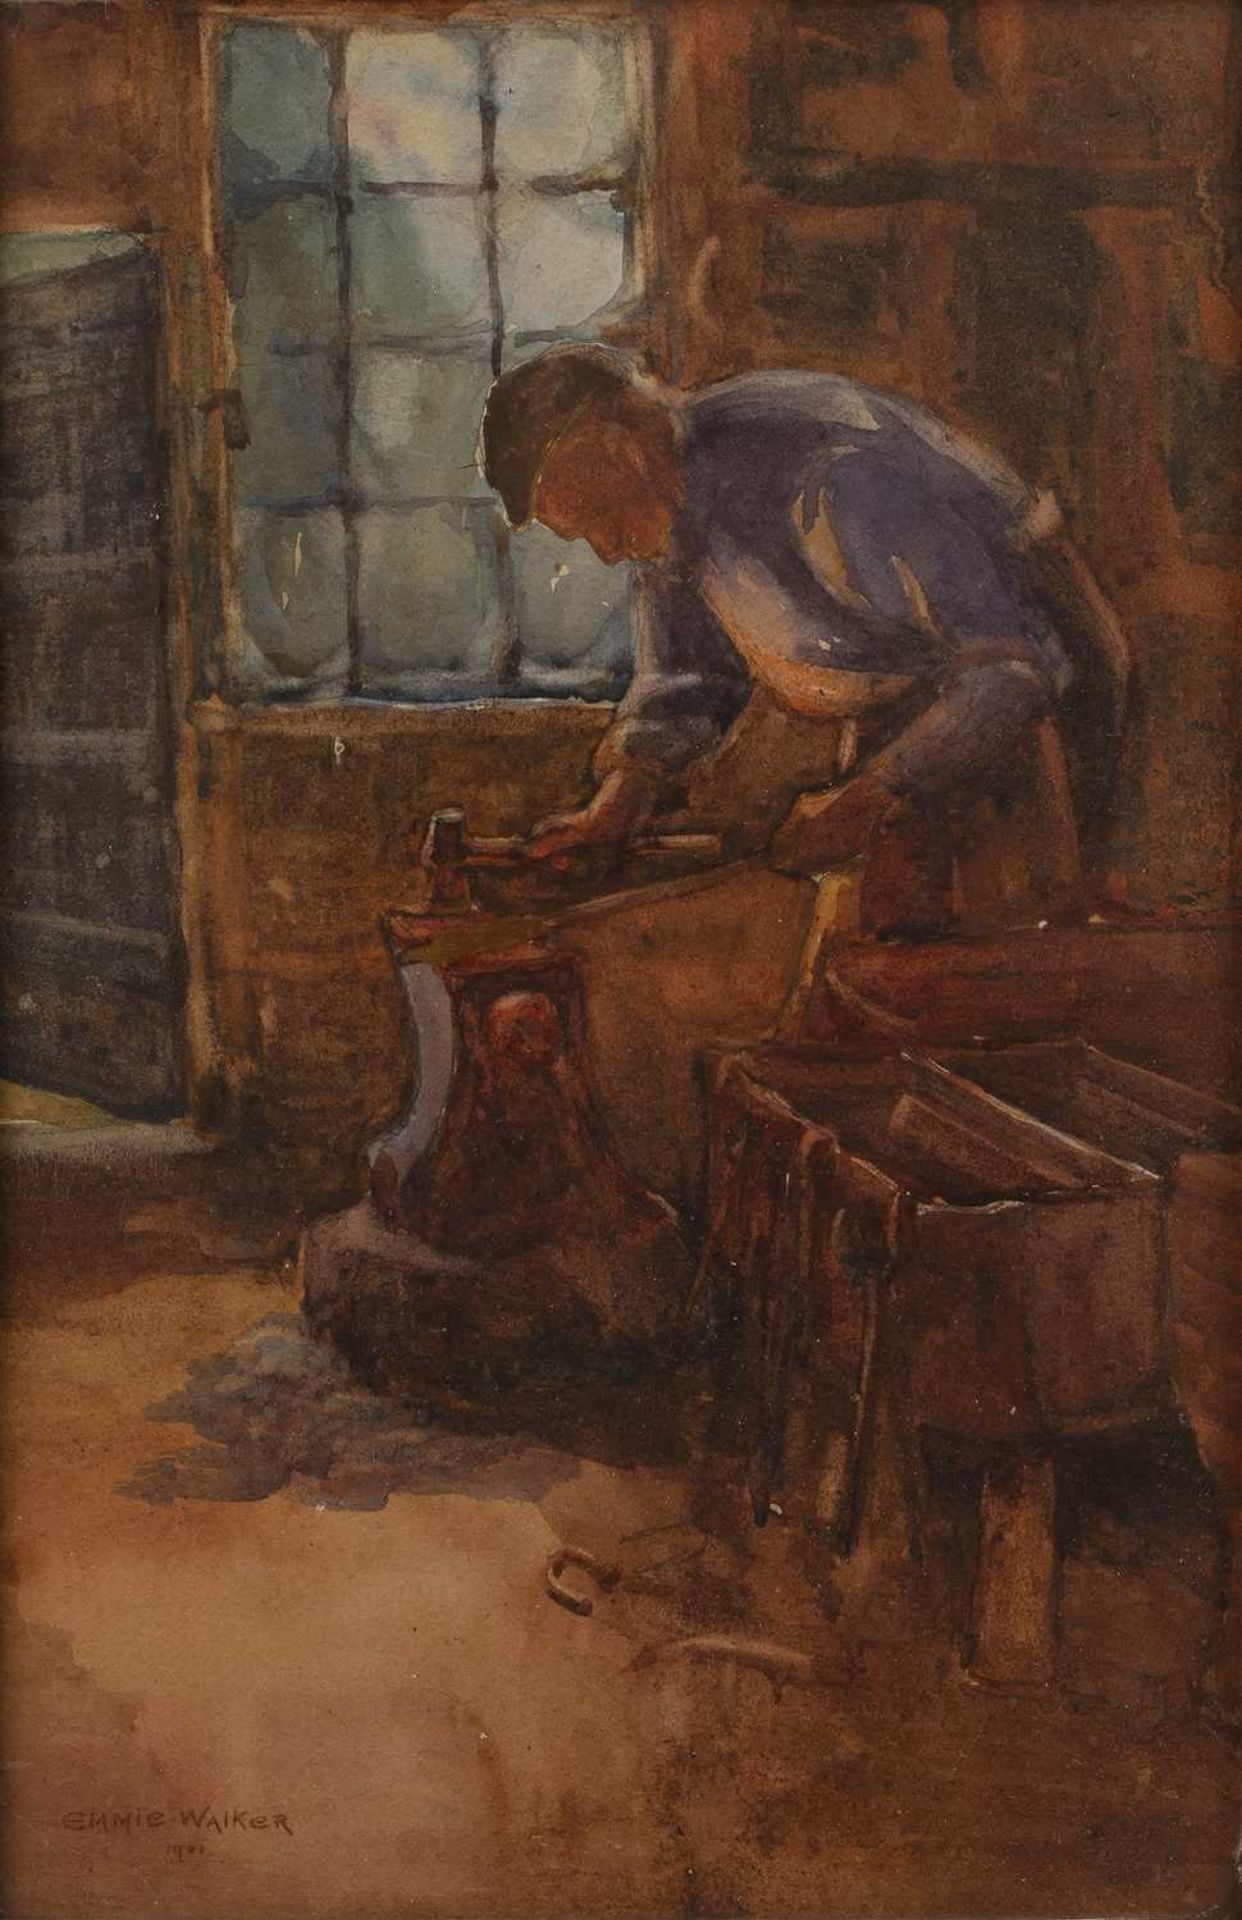 Emmie Walker (20th Century School) 'Untitled blacksmith at work', watercolour, signed and dated 1901